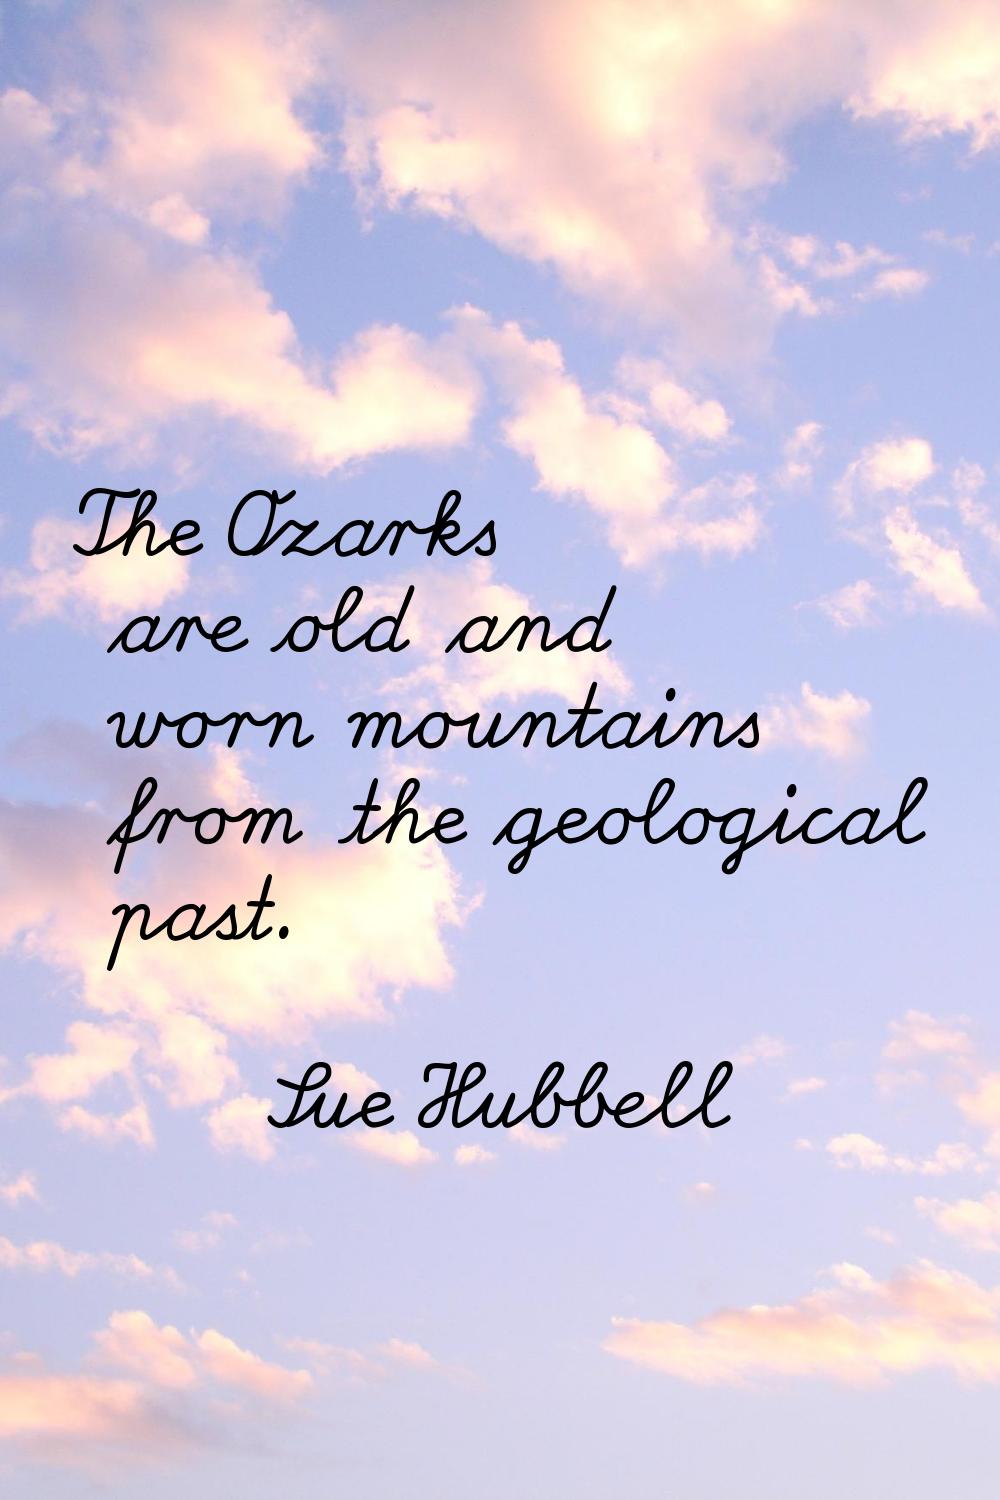 The Ozarks are old and worn mountains from the geological past.